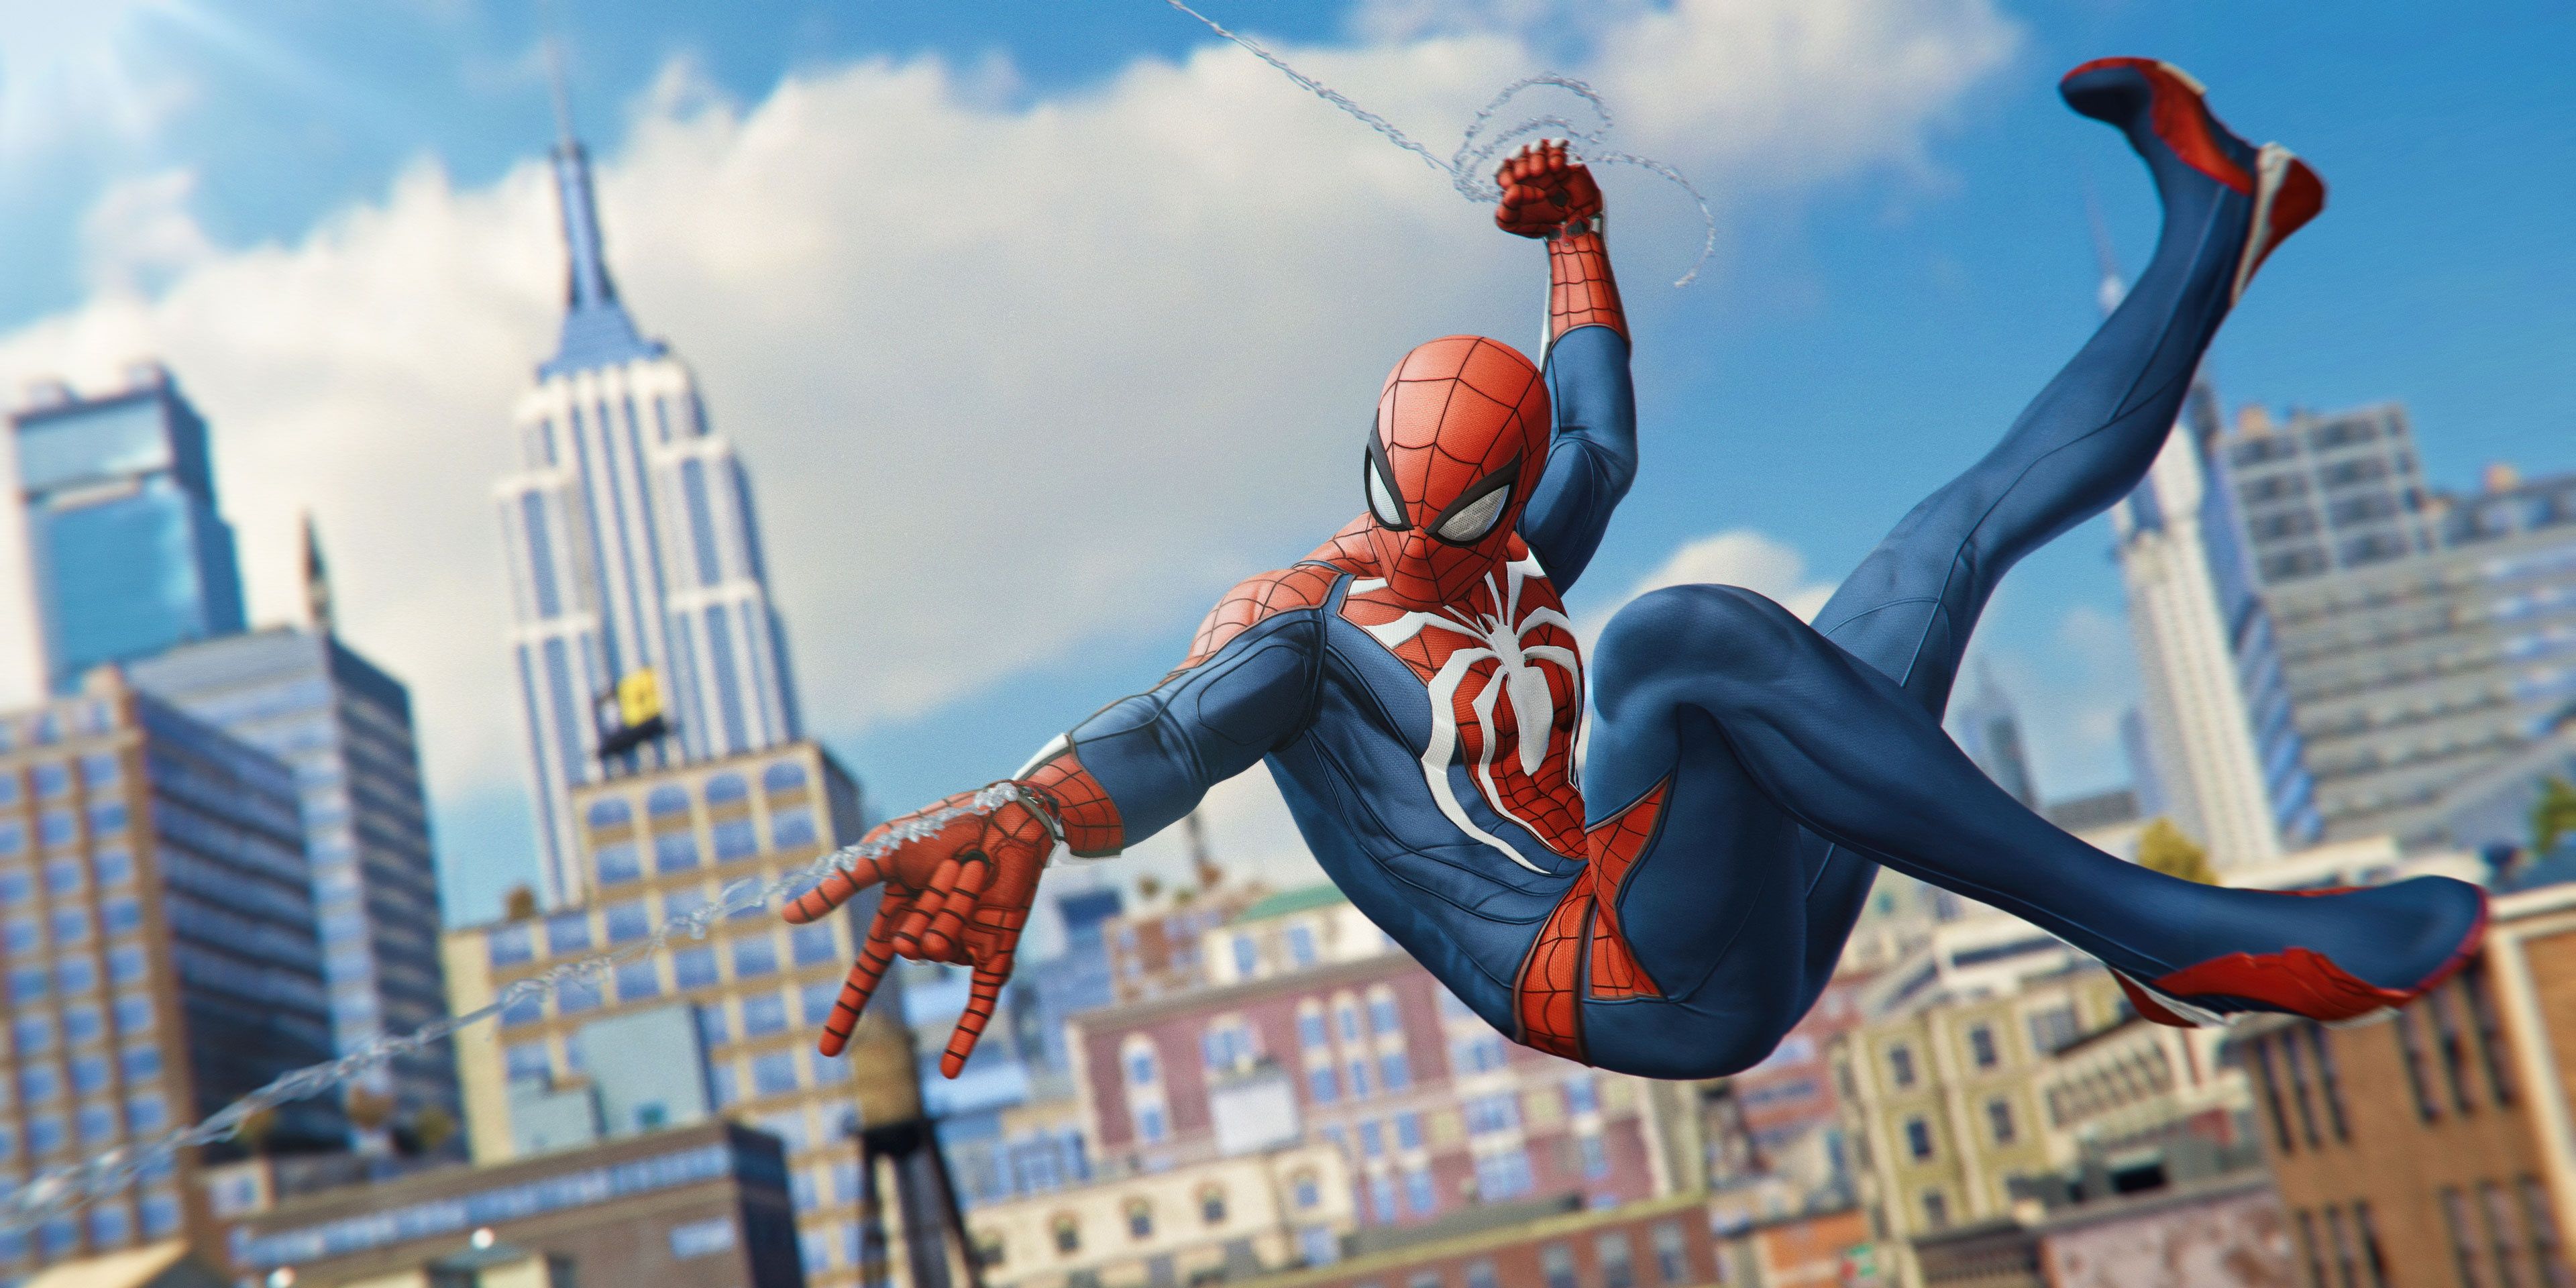 Spider-Man swinging from web and shooting another web, New York in background